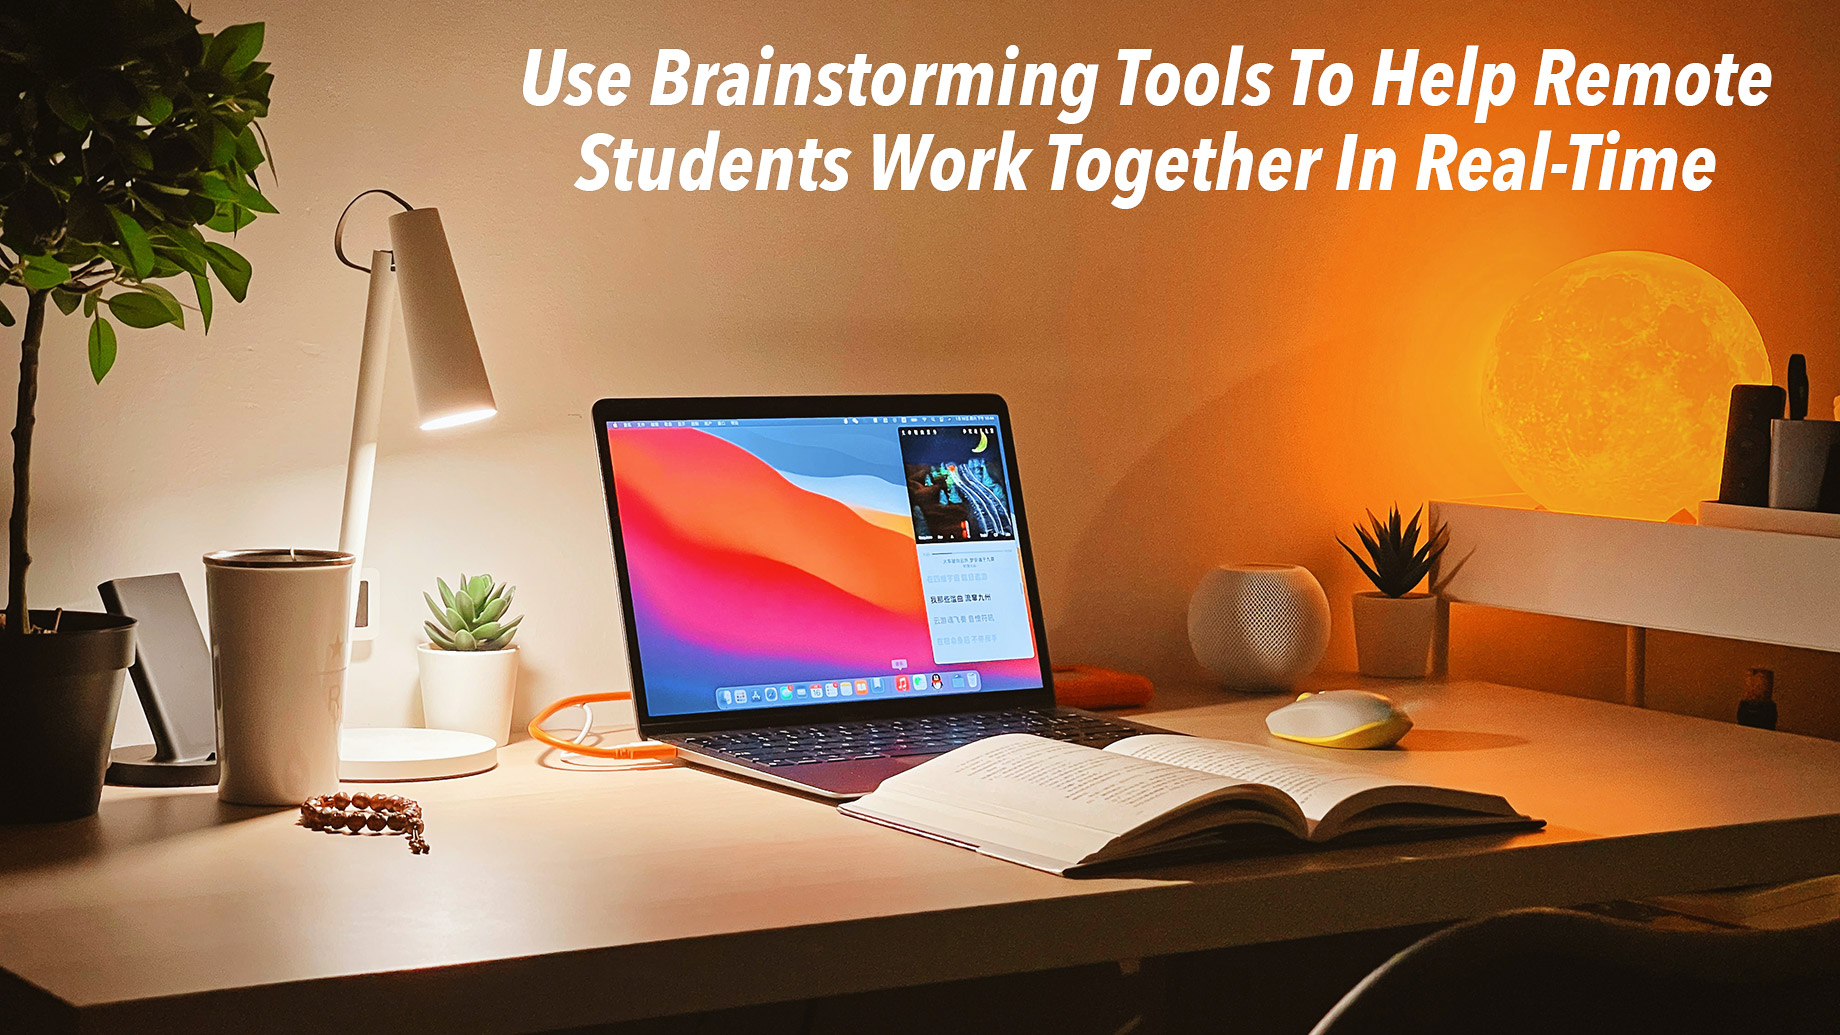 Use Brainstorming Tools To Help Remote Students Work Together In Real-Time